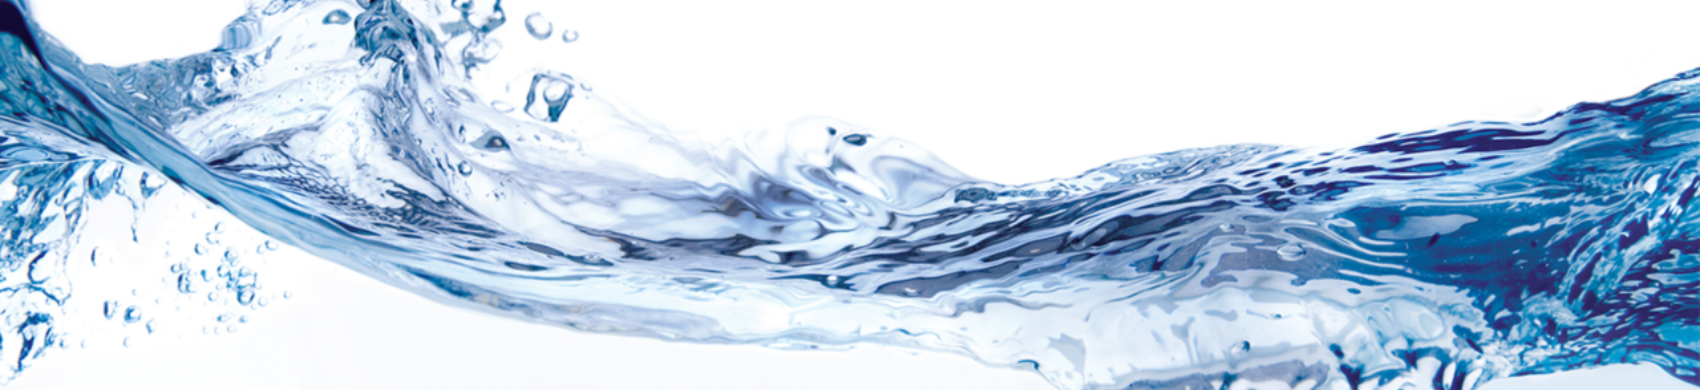 Low Mineral Content Water Filtration Solutions - Vita Filters